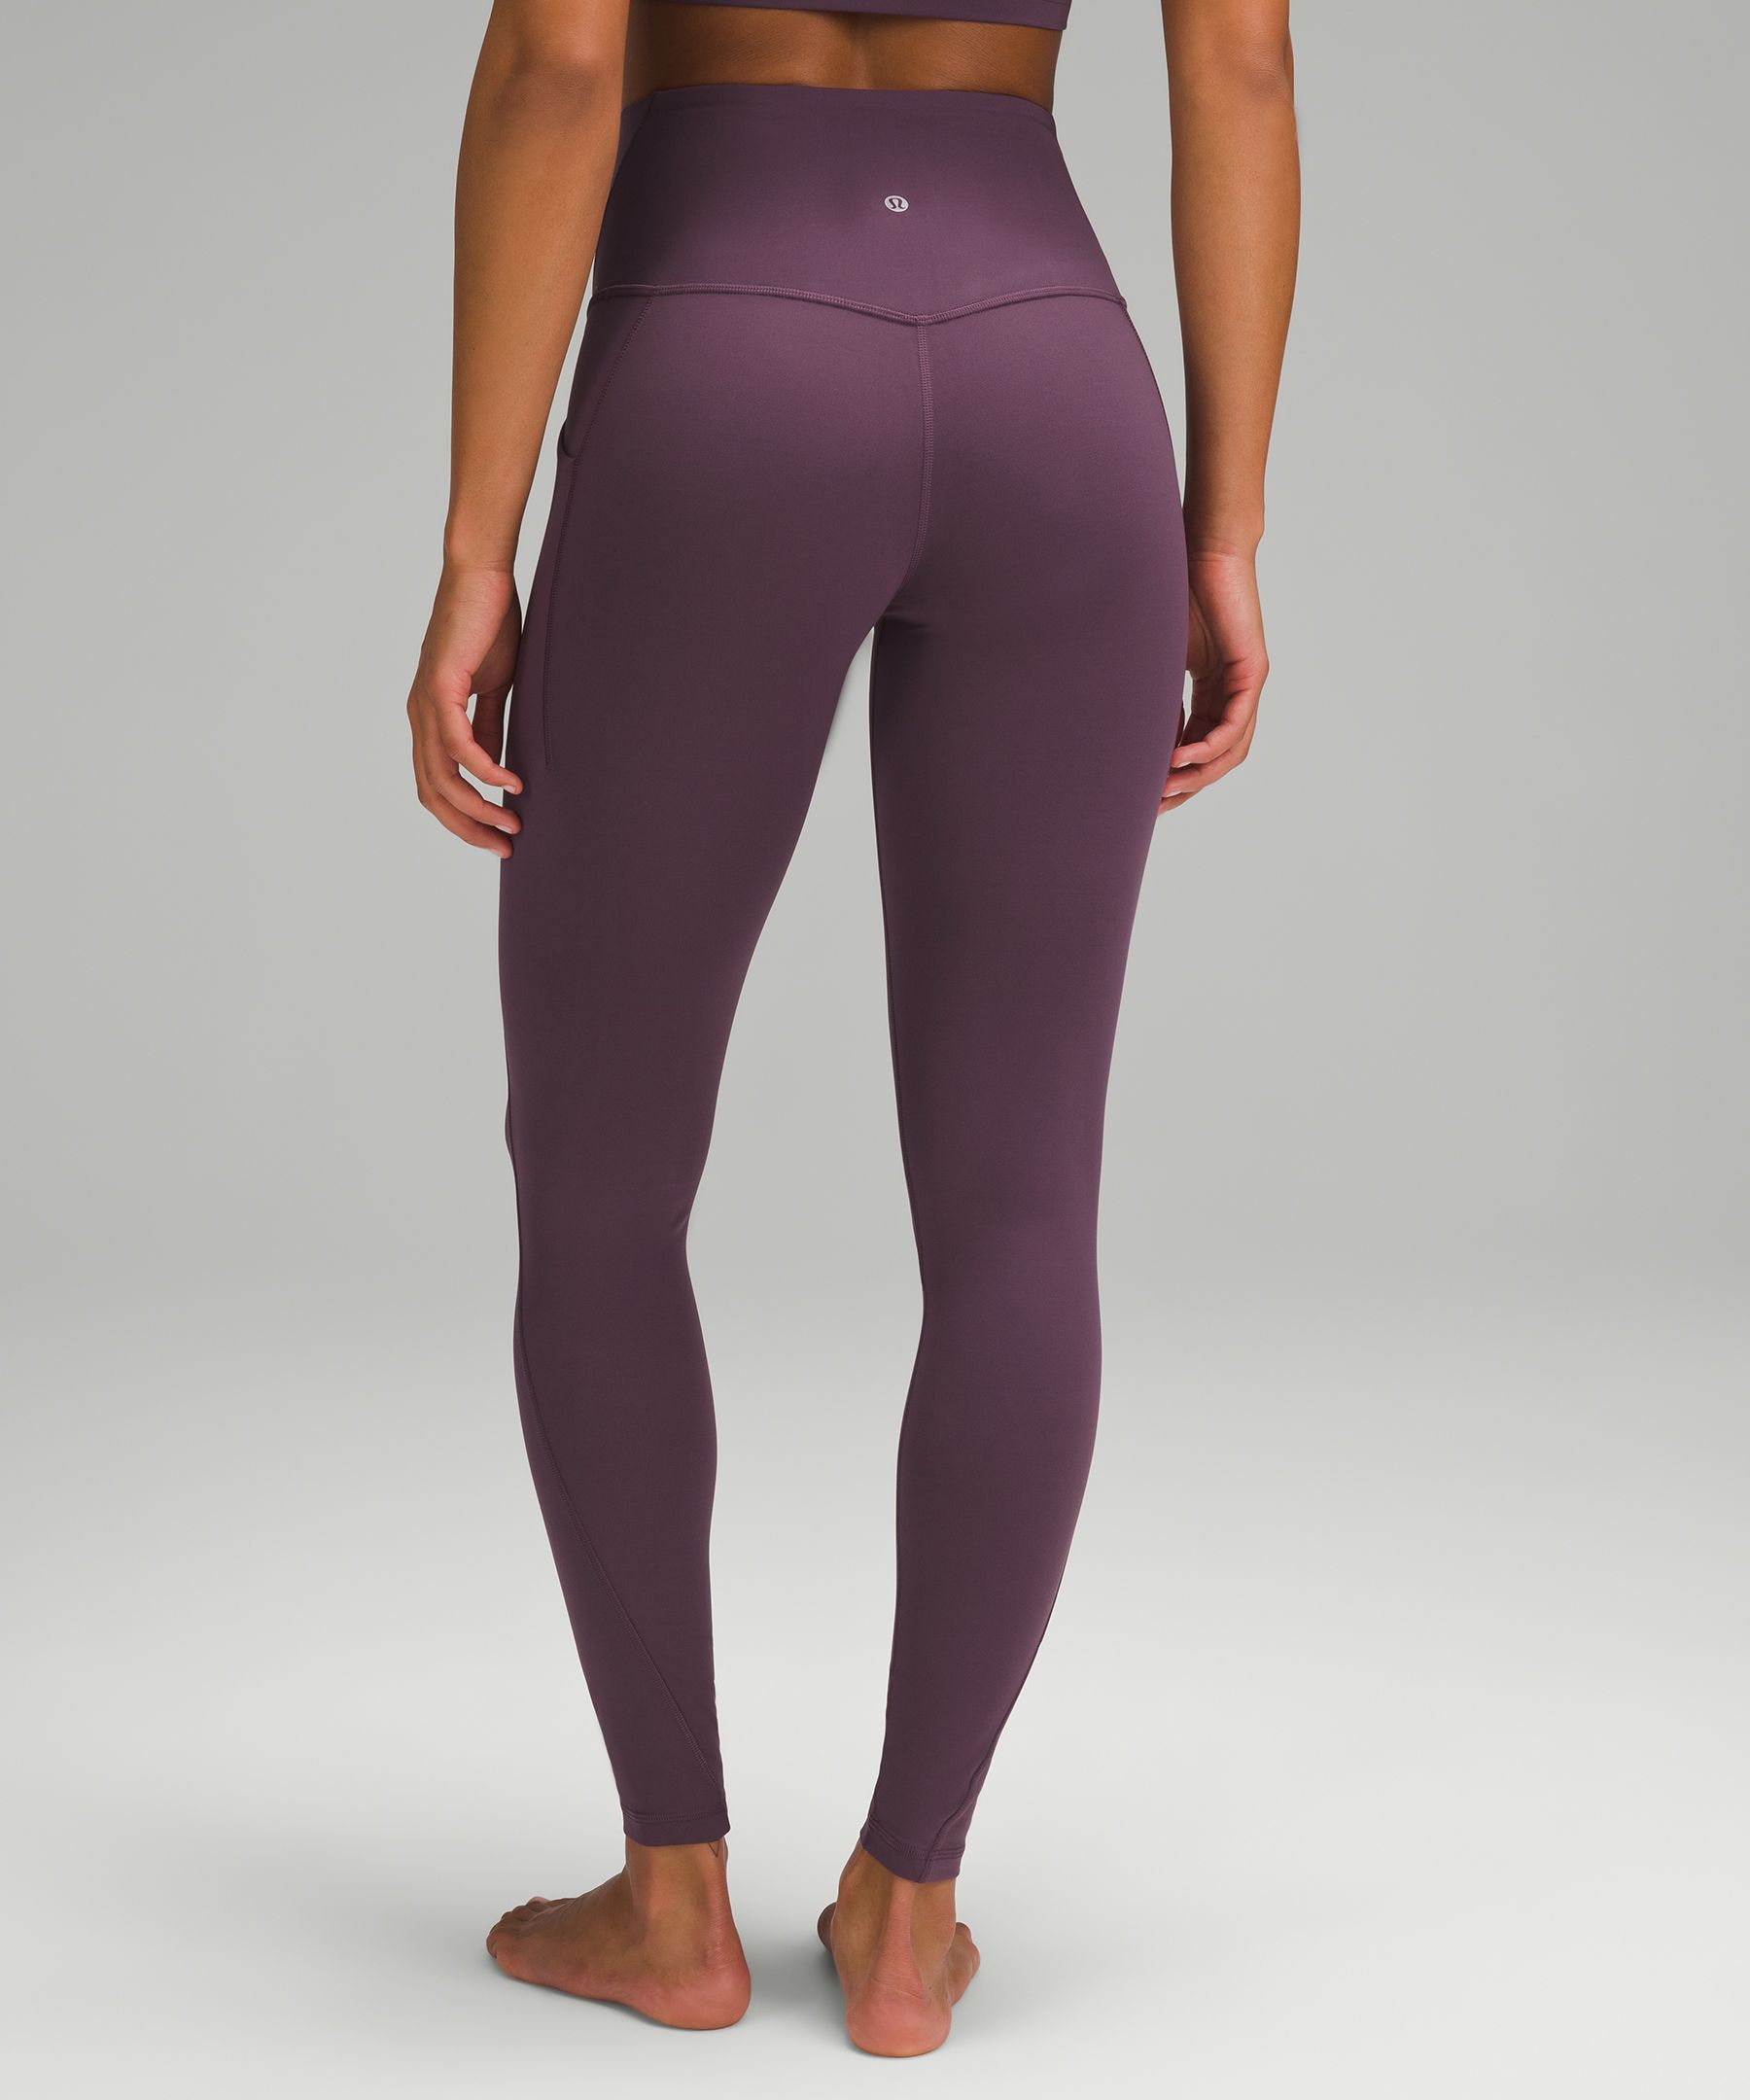 Are Lululemon Align Leggings See-Through? Let's Find Out! - Playbite